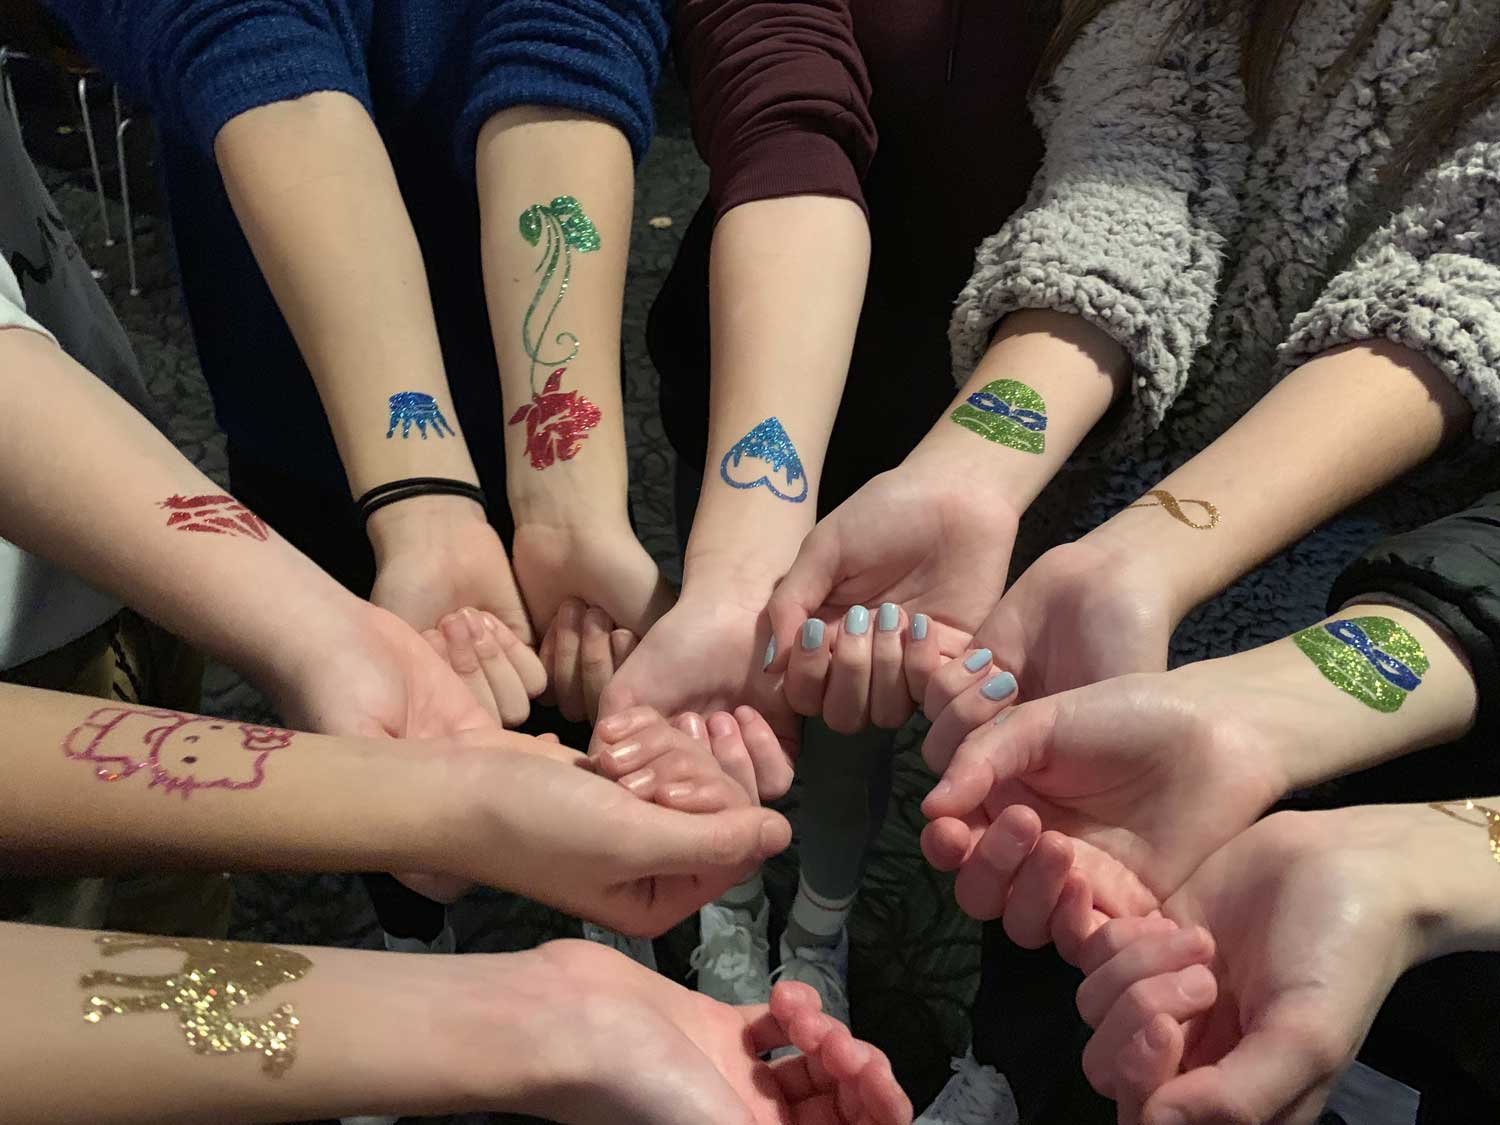 Group of people showing off their temporary tattoos while holding hands.